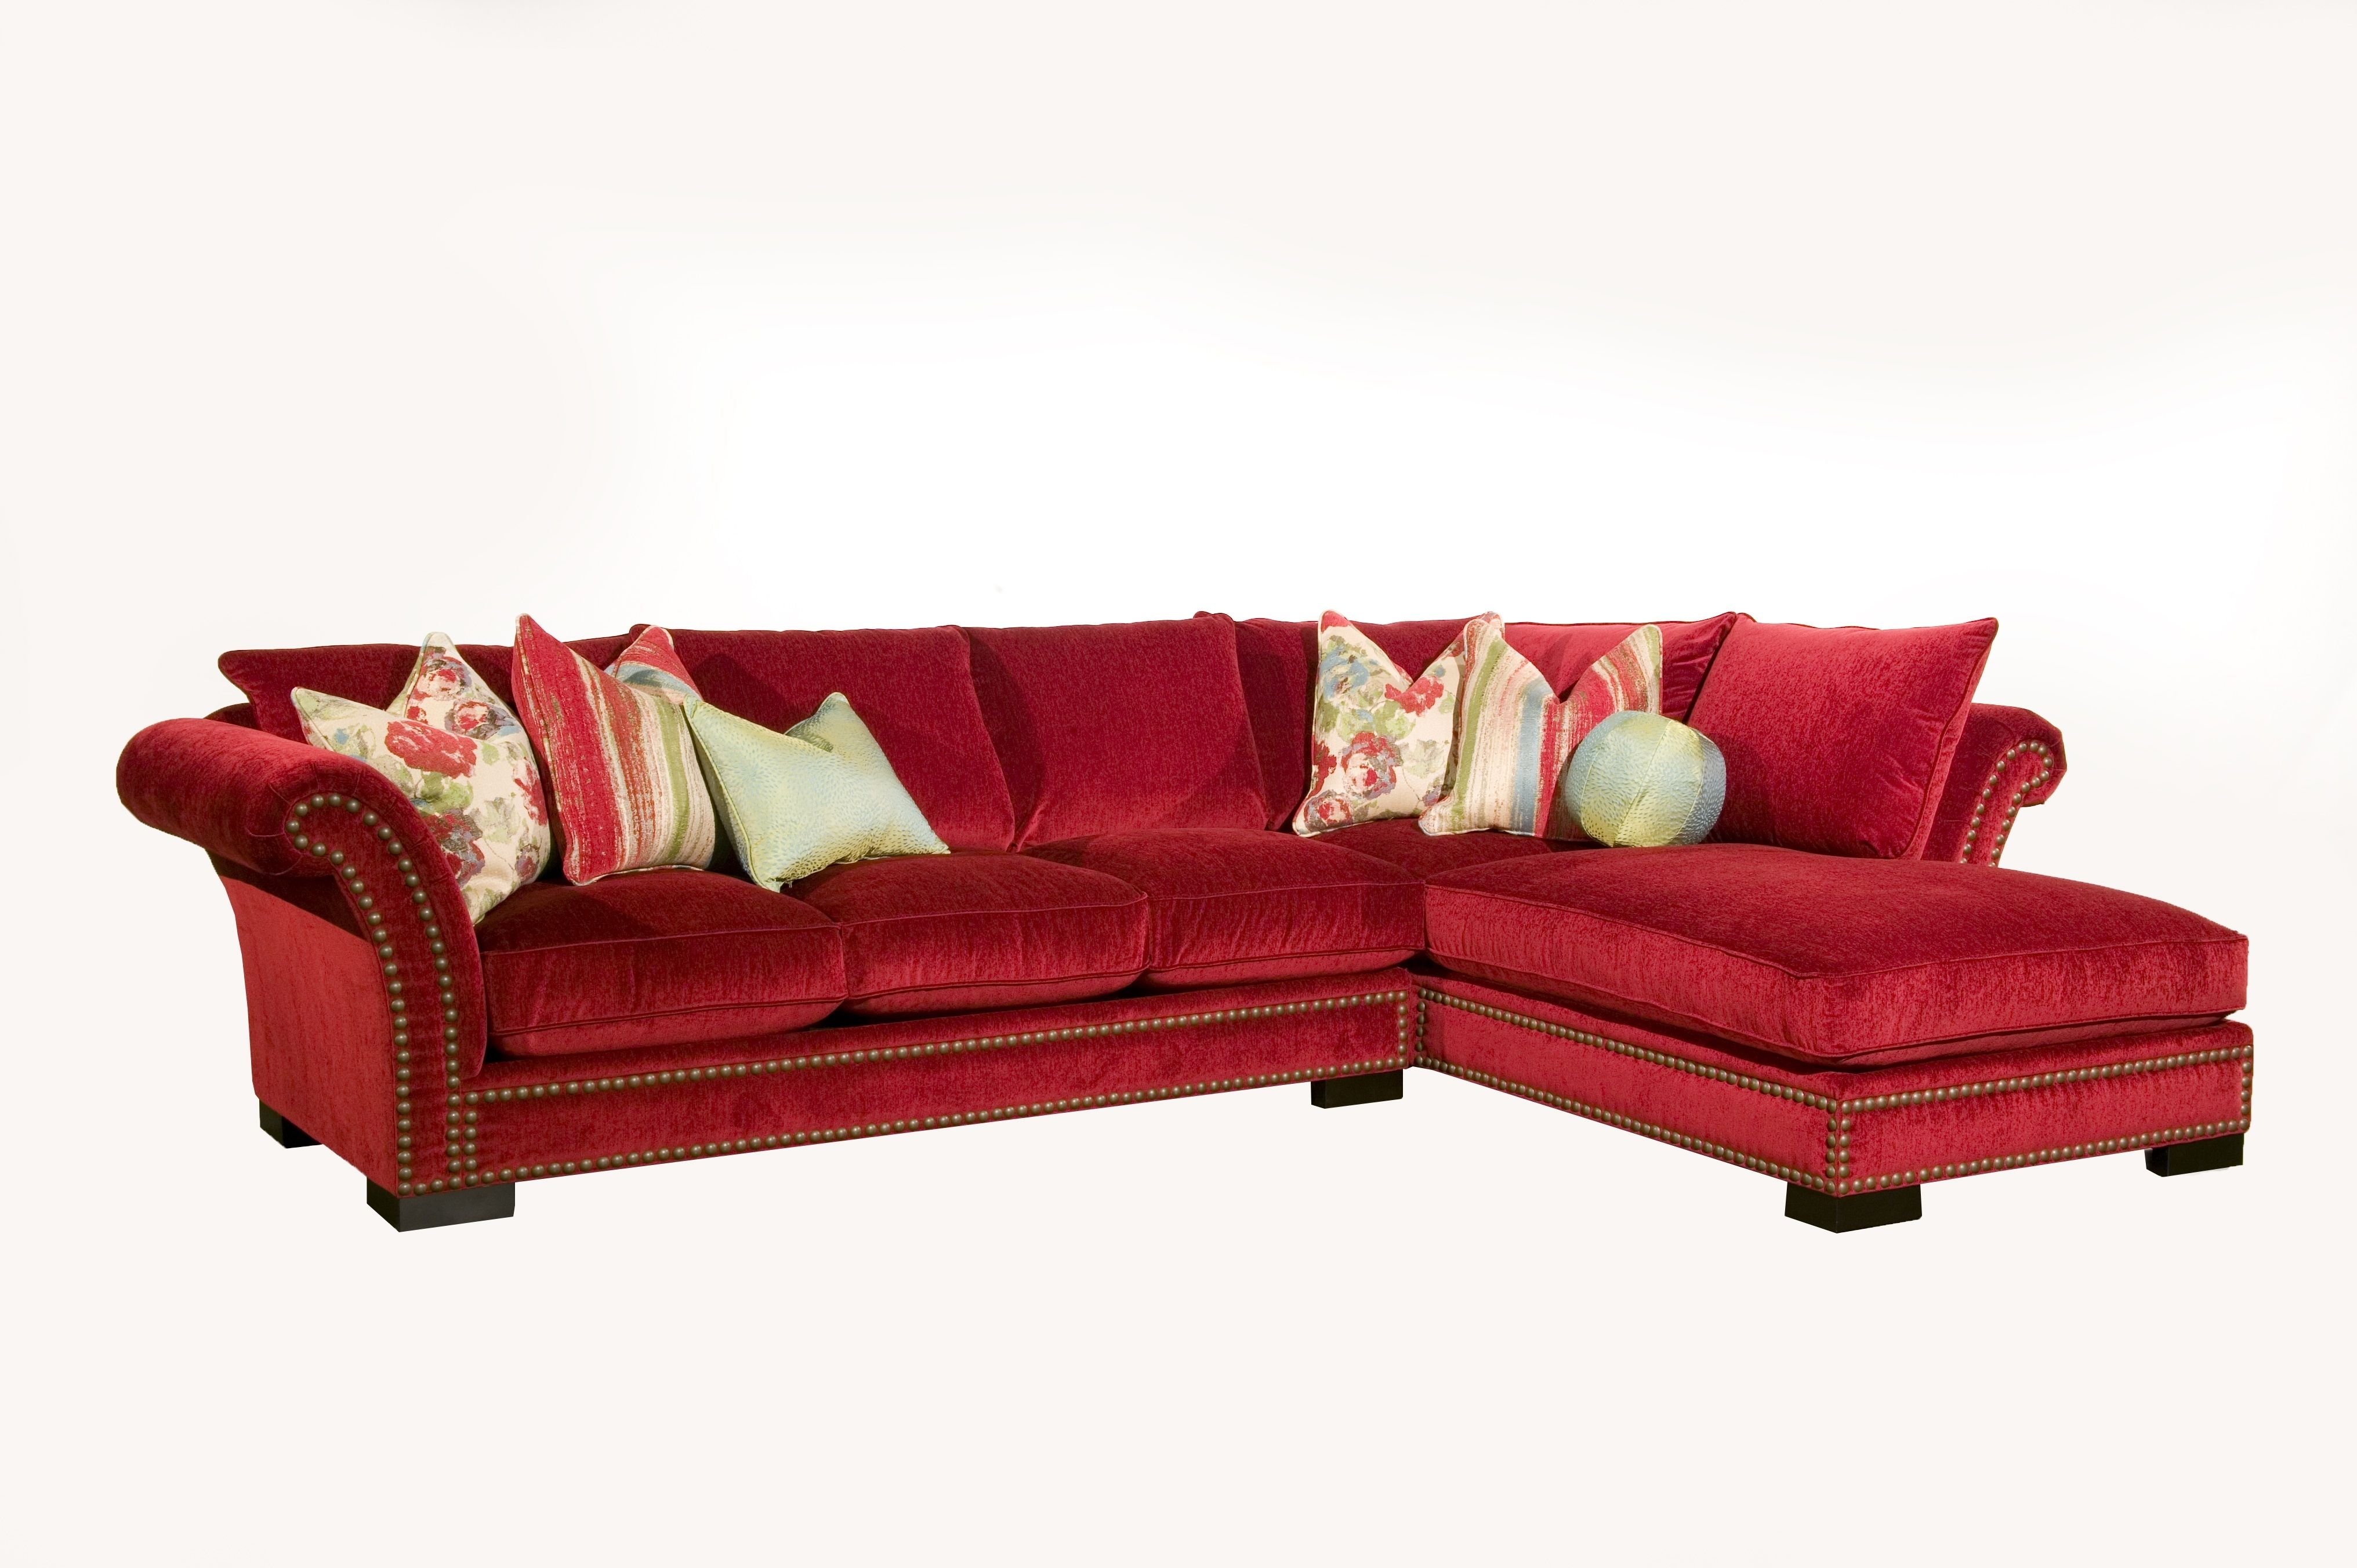 L Shaped Red Velvet Sectional Sofa With Back And Brown Stitching Within Velvet Sectional Sofas (View 9 of 10)